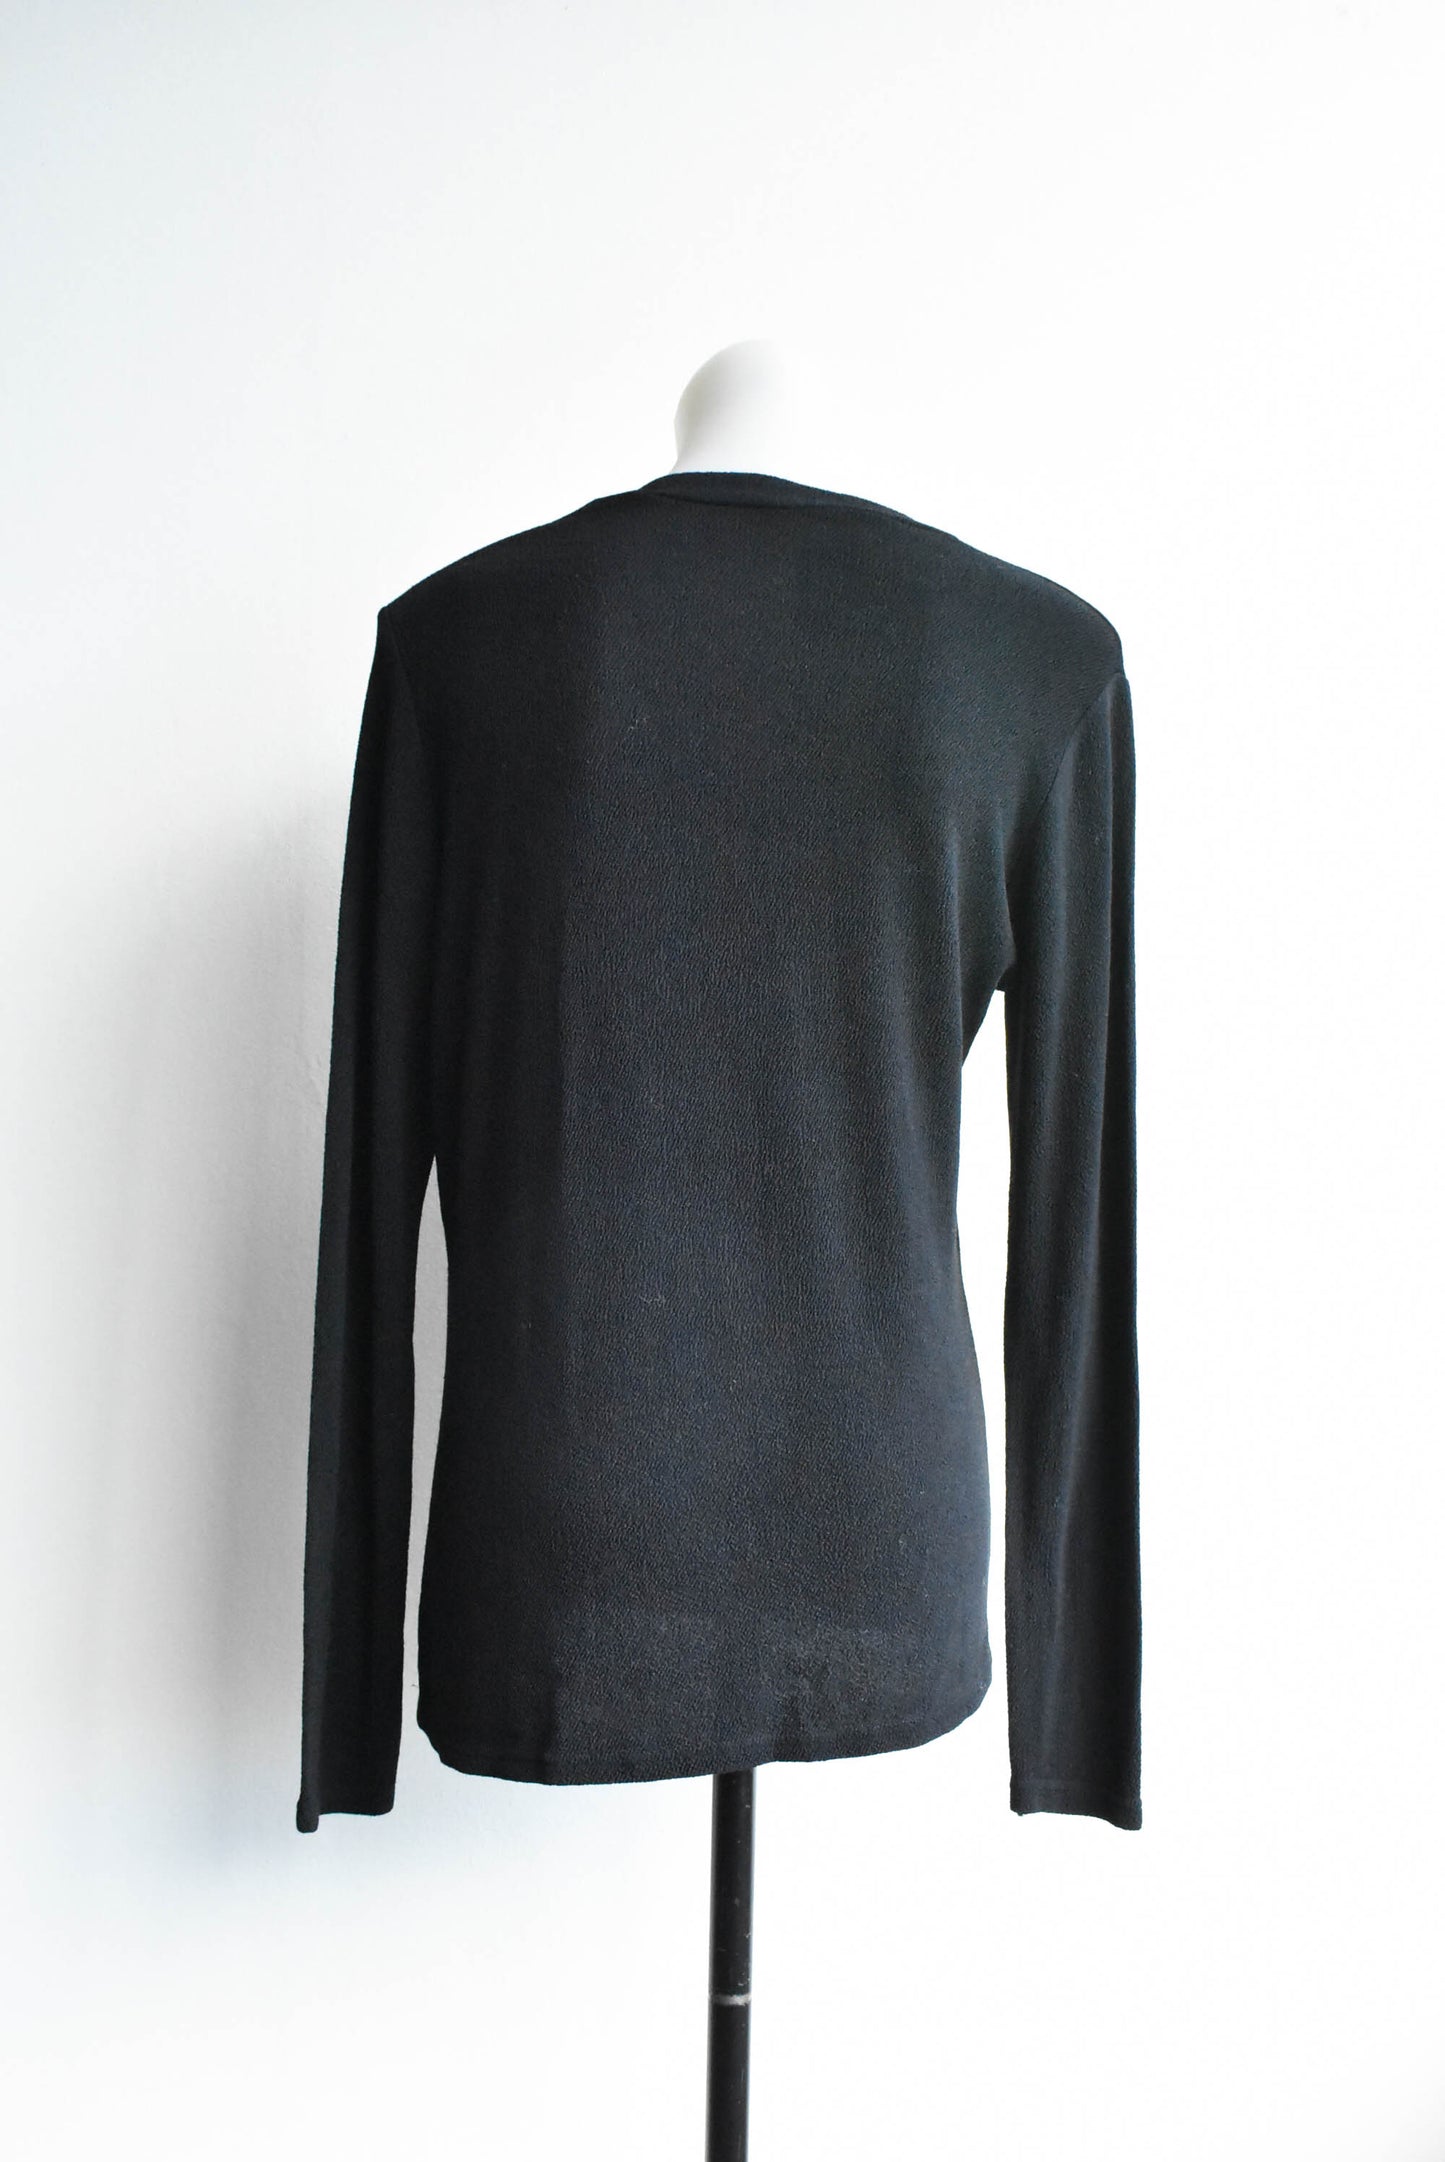 Silk and cotton blend beaded long sleeve top, size S